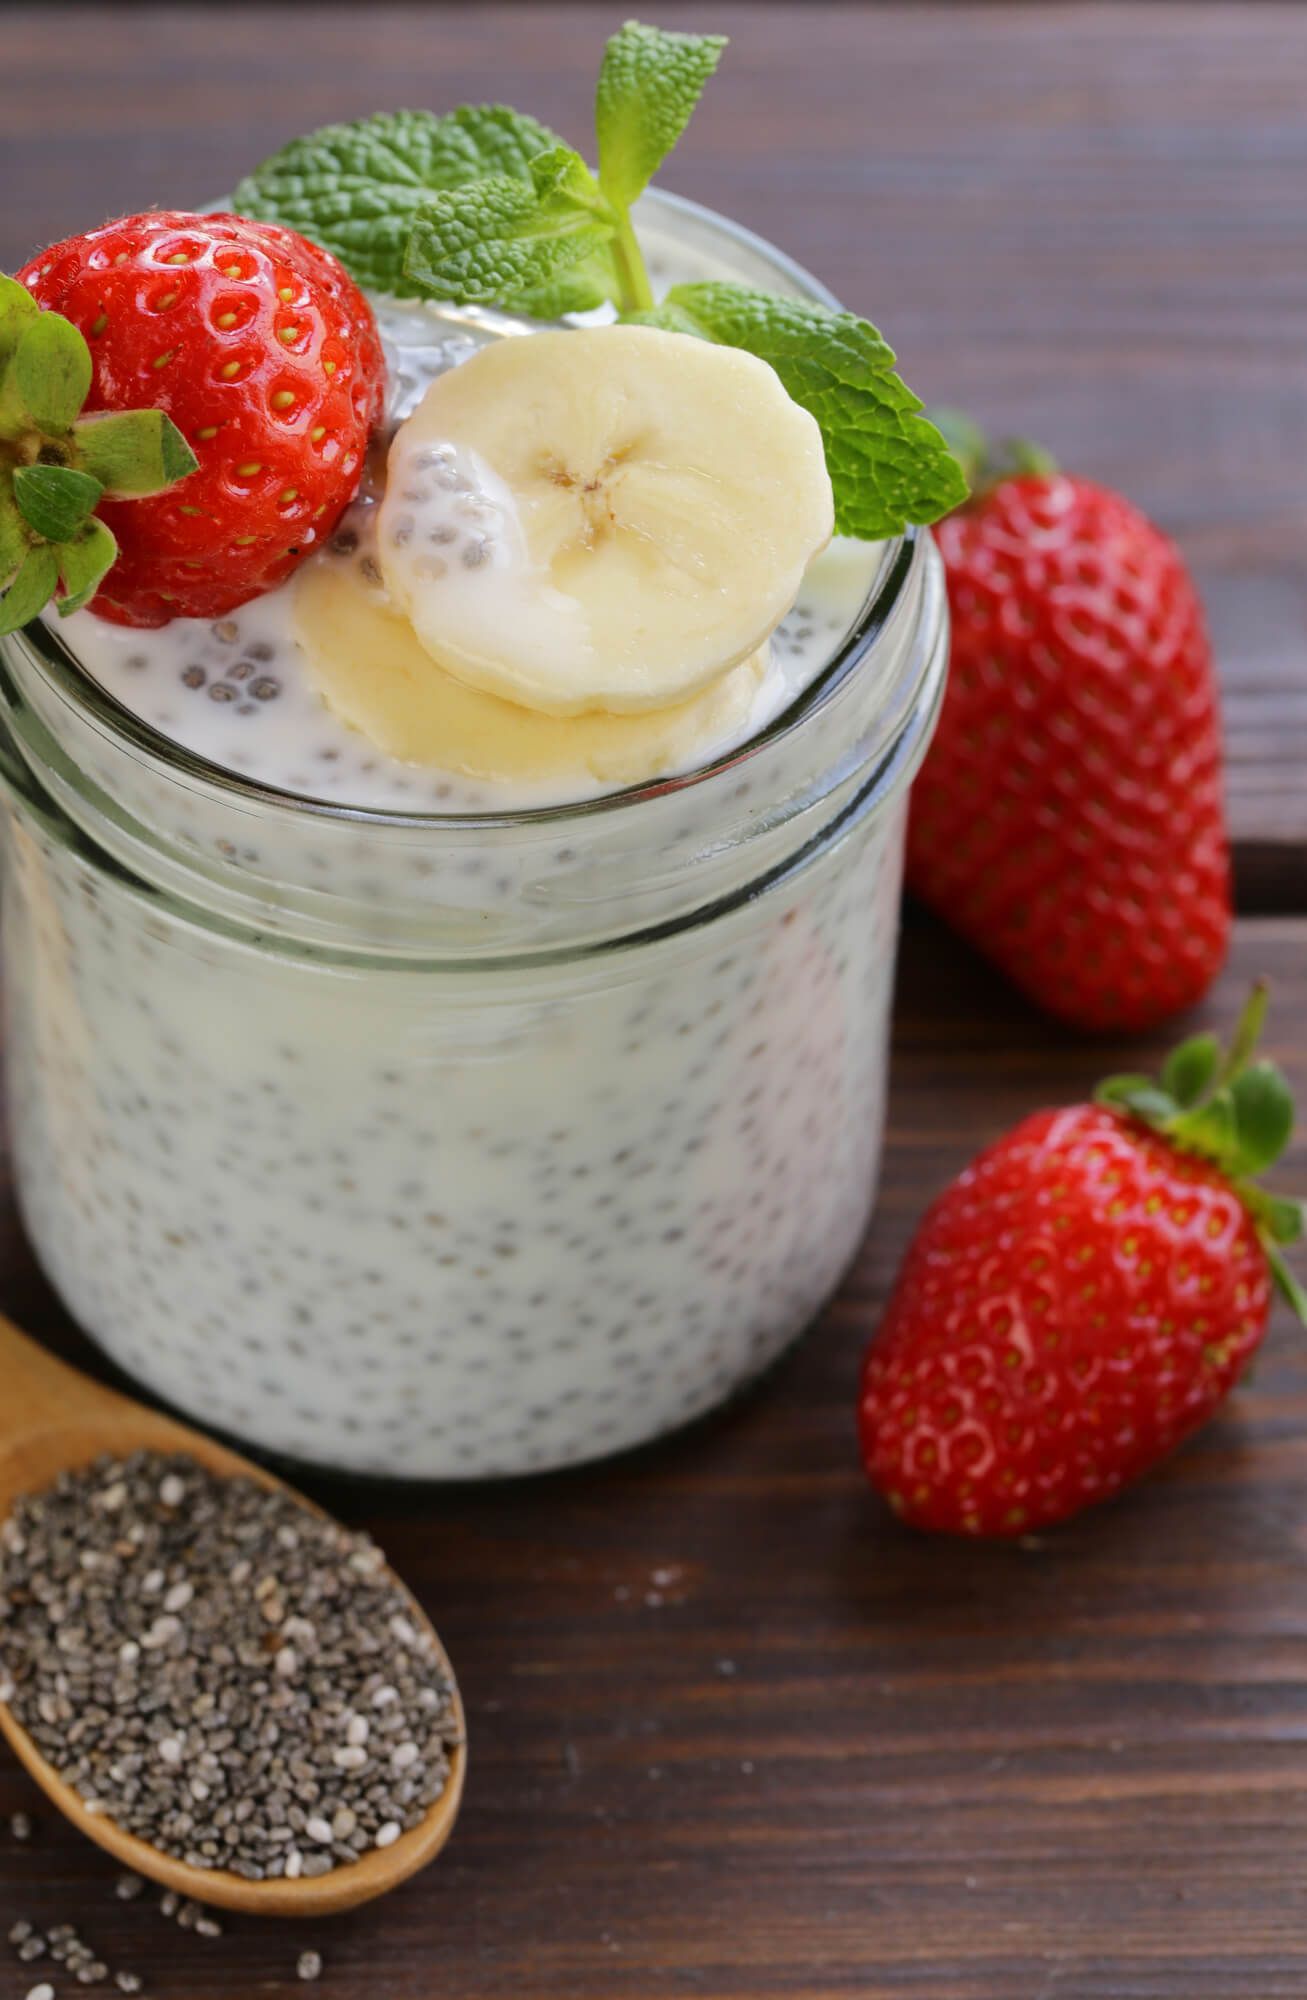 Yogurt chia seed pudding in a glass jar with a sliced banana and strawberry.